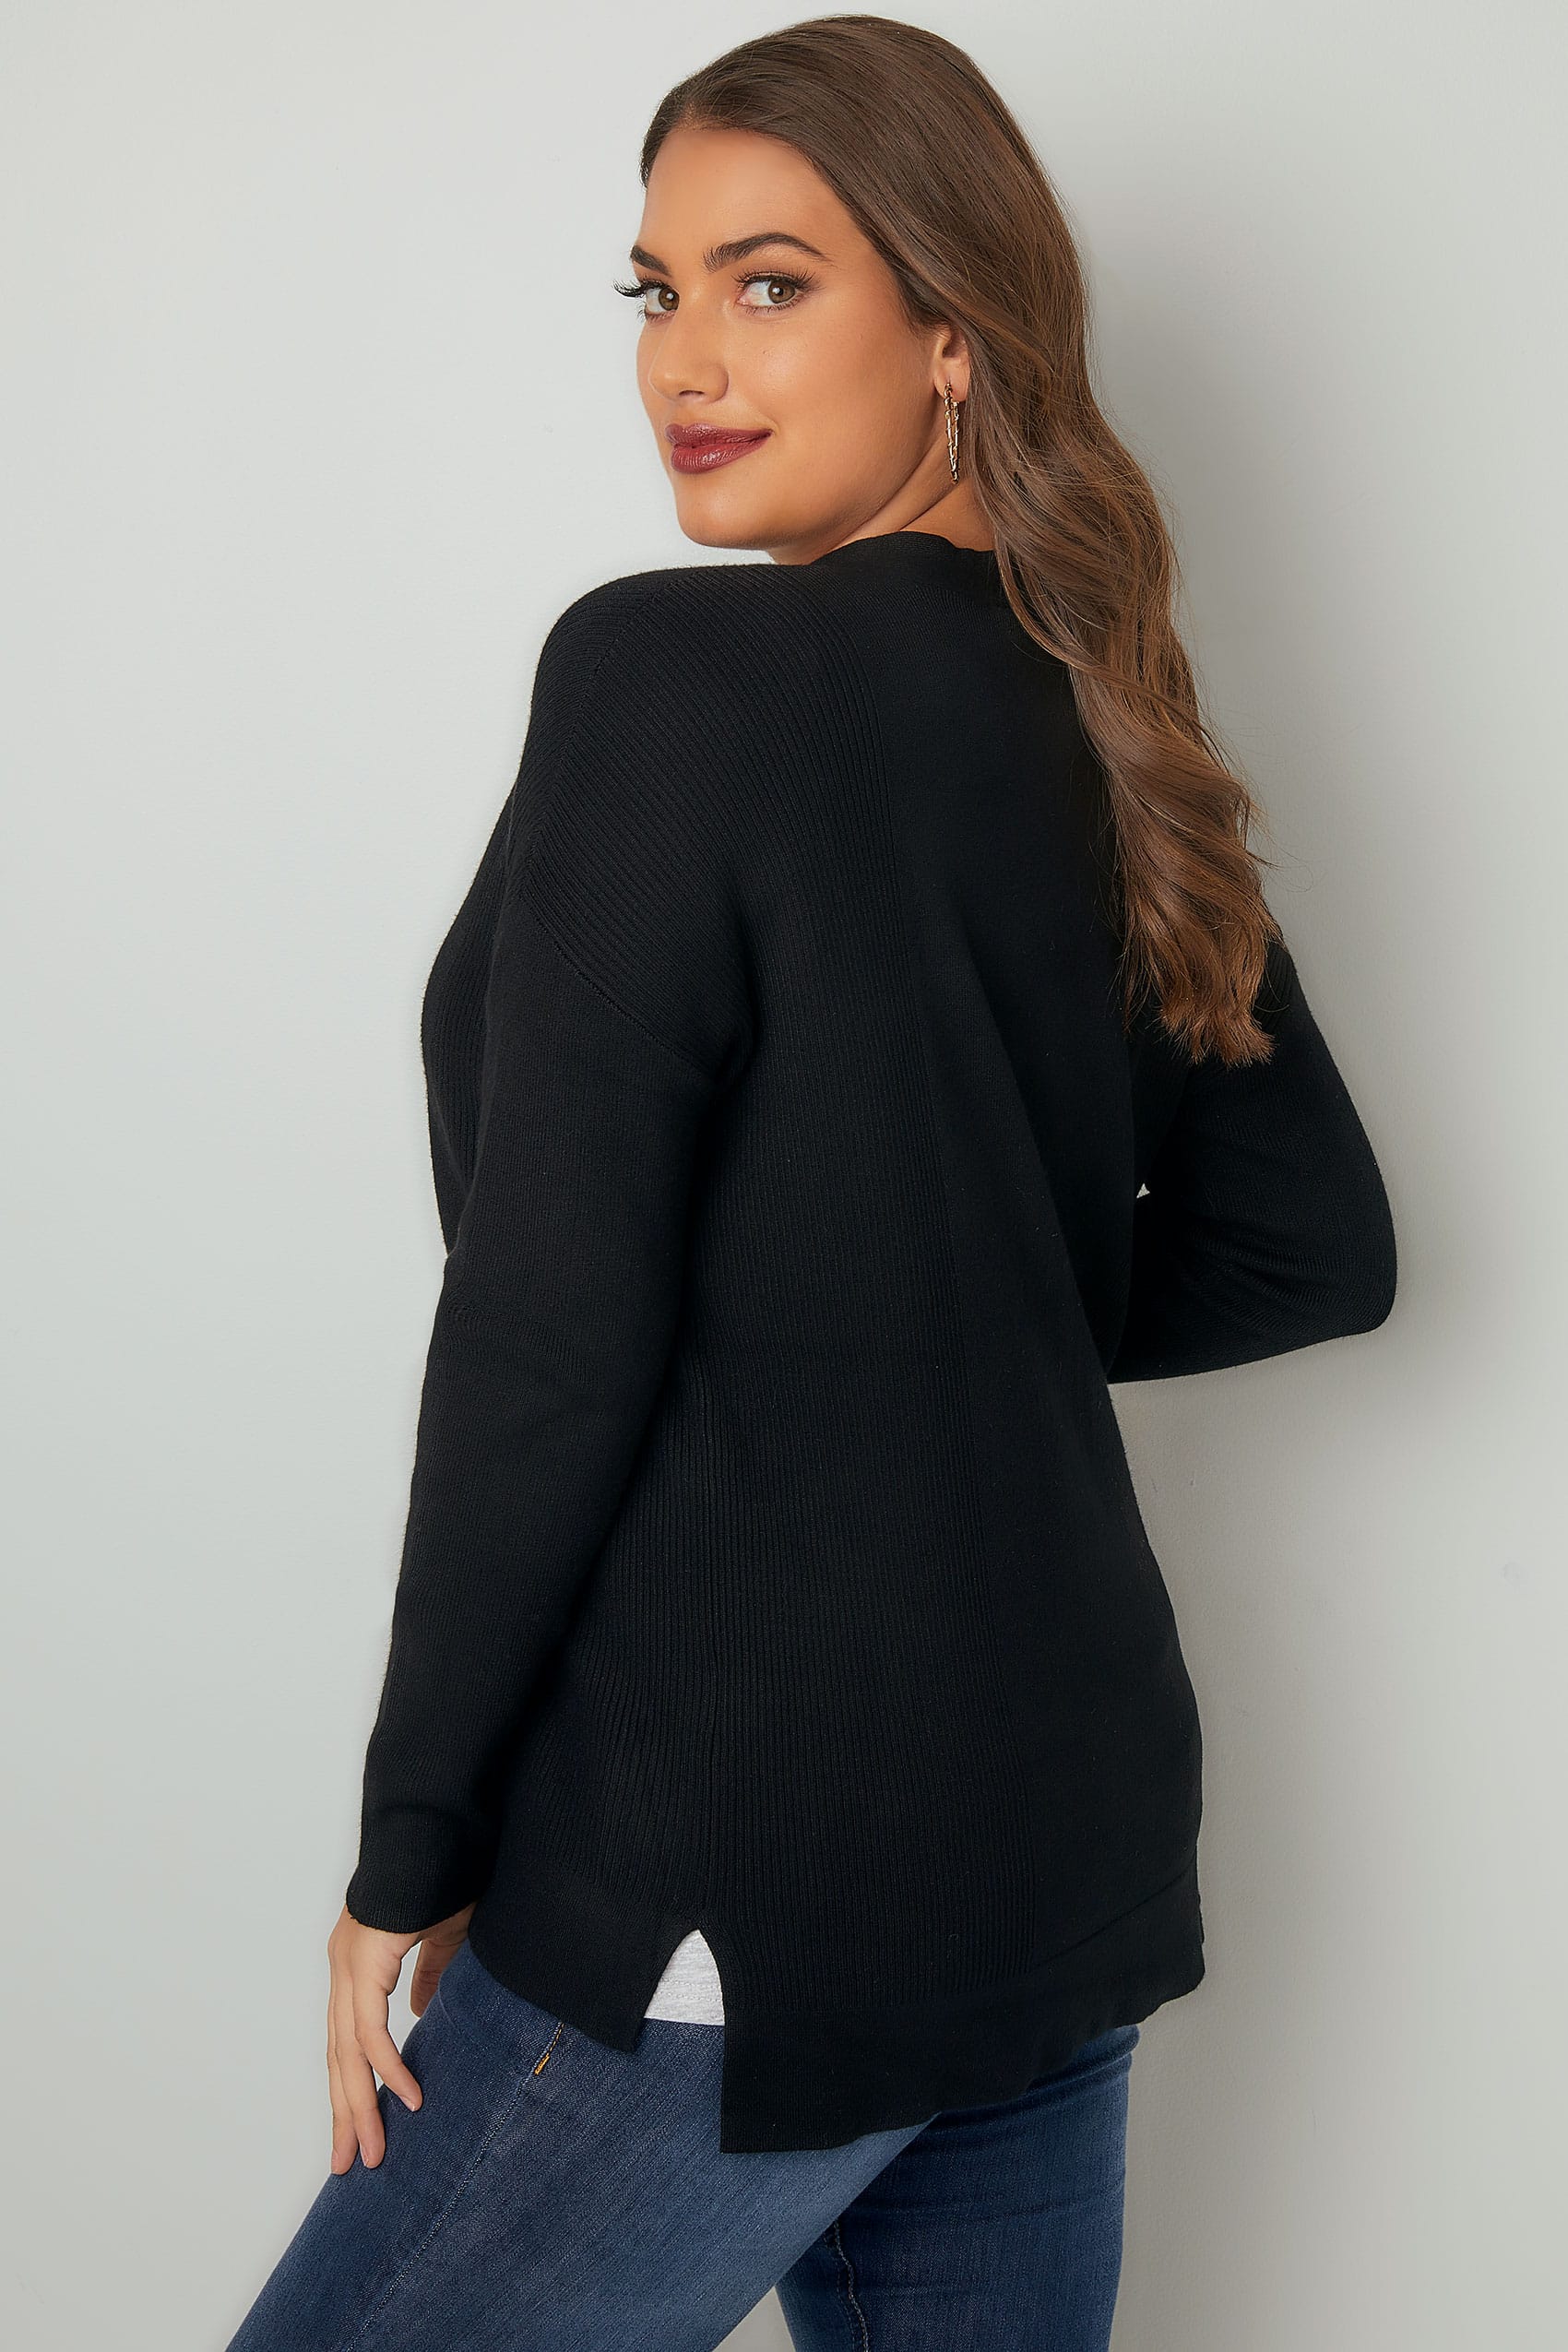 Black Cardigan With Zip Front, Plus size 16 to 36